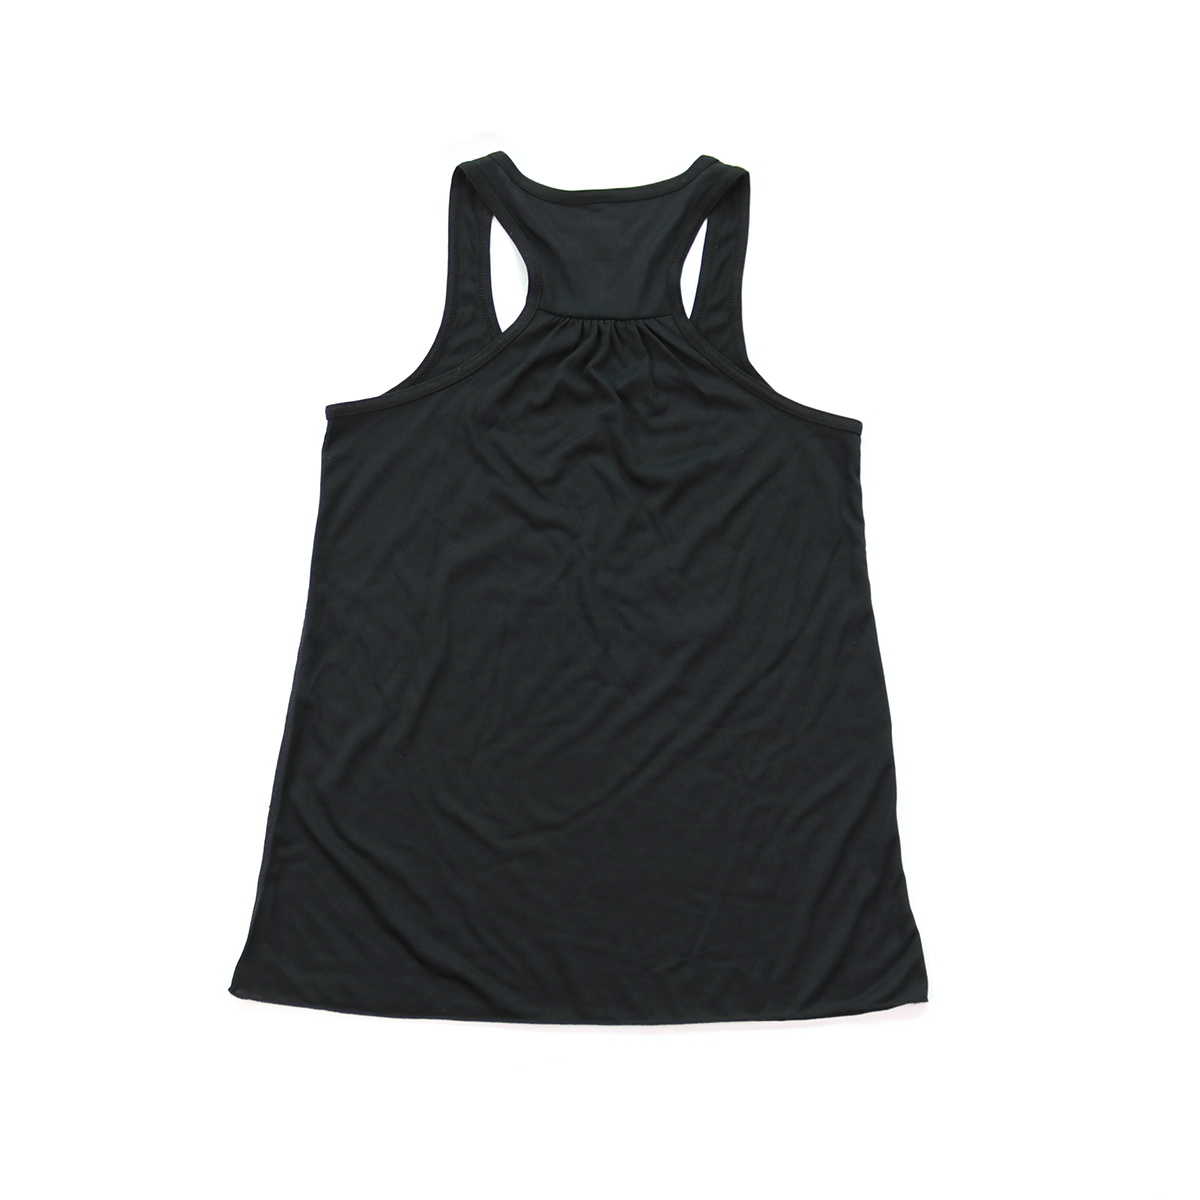 Buy Ginger by Lifestyle Black Raceback Tank Top - Tops for Women 1119359